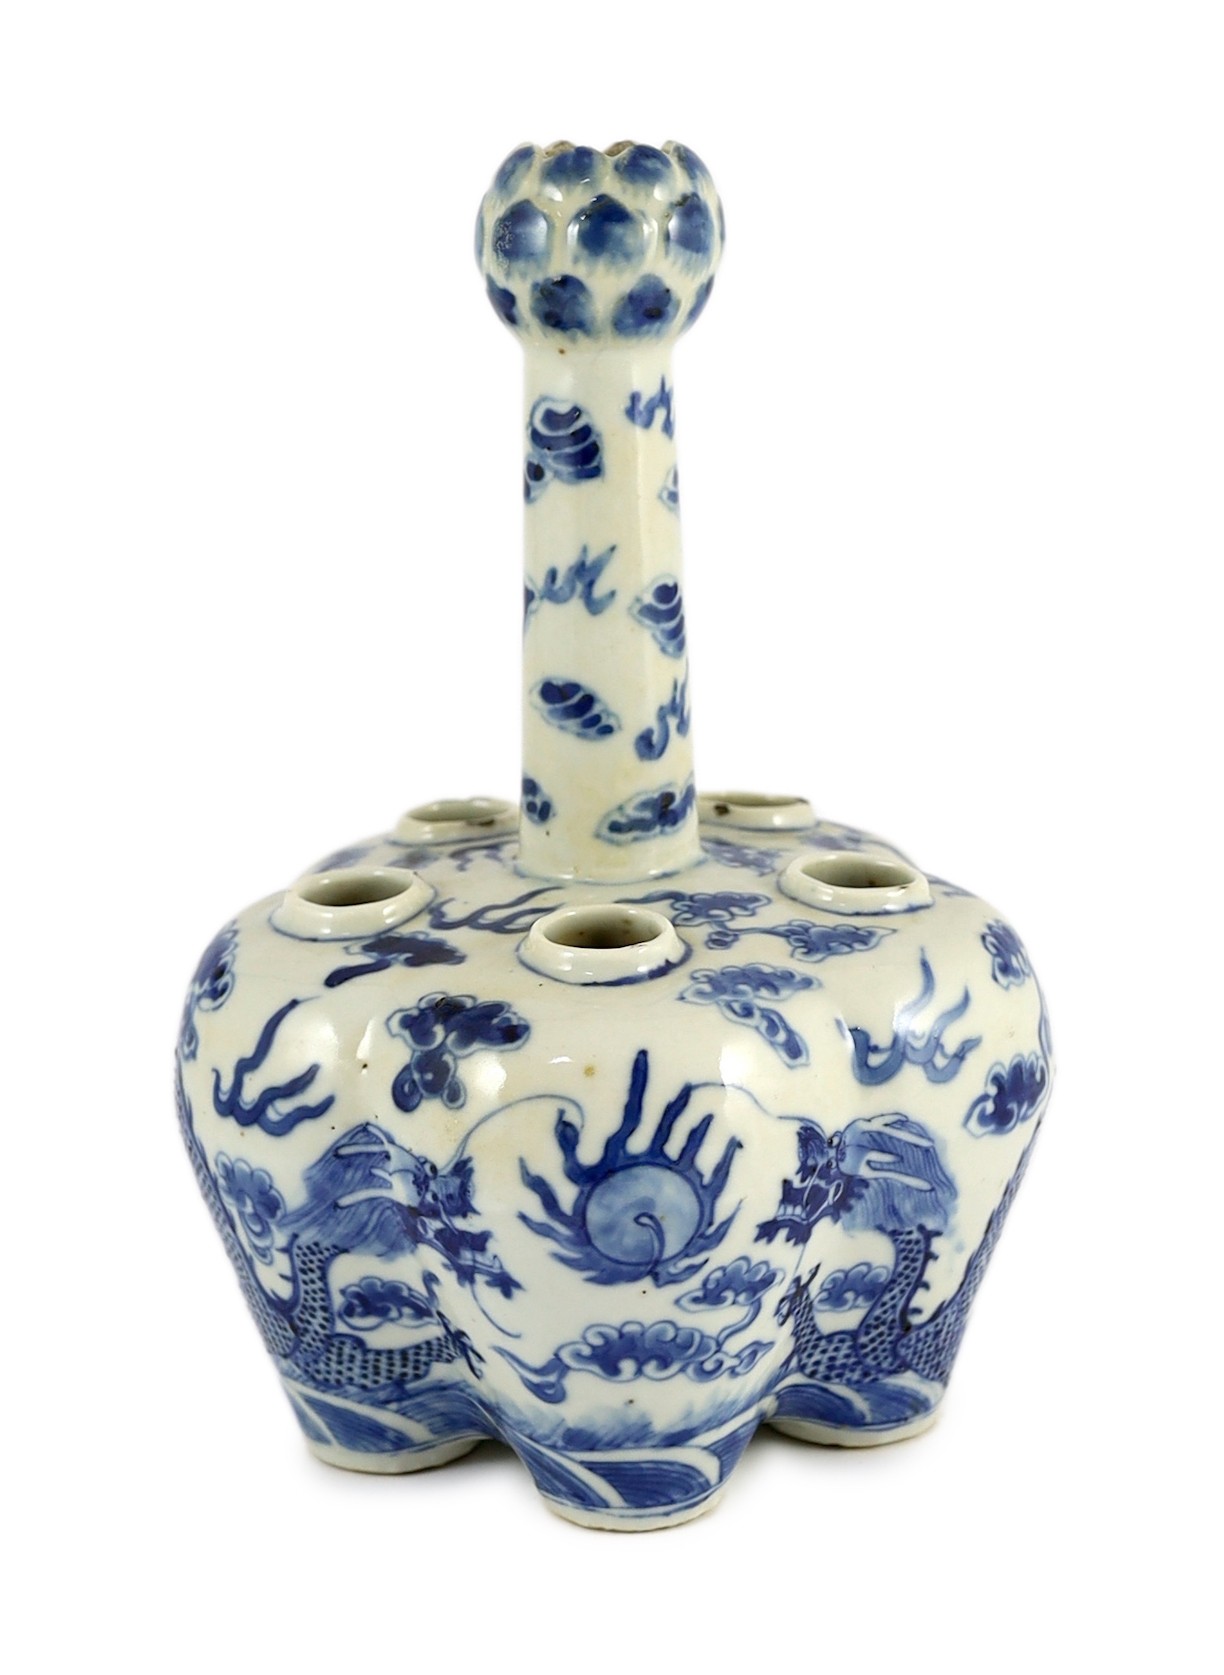 A Chinese blue and white ’dragon’ tulip vase, 19th century, painted with two confronting four claw